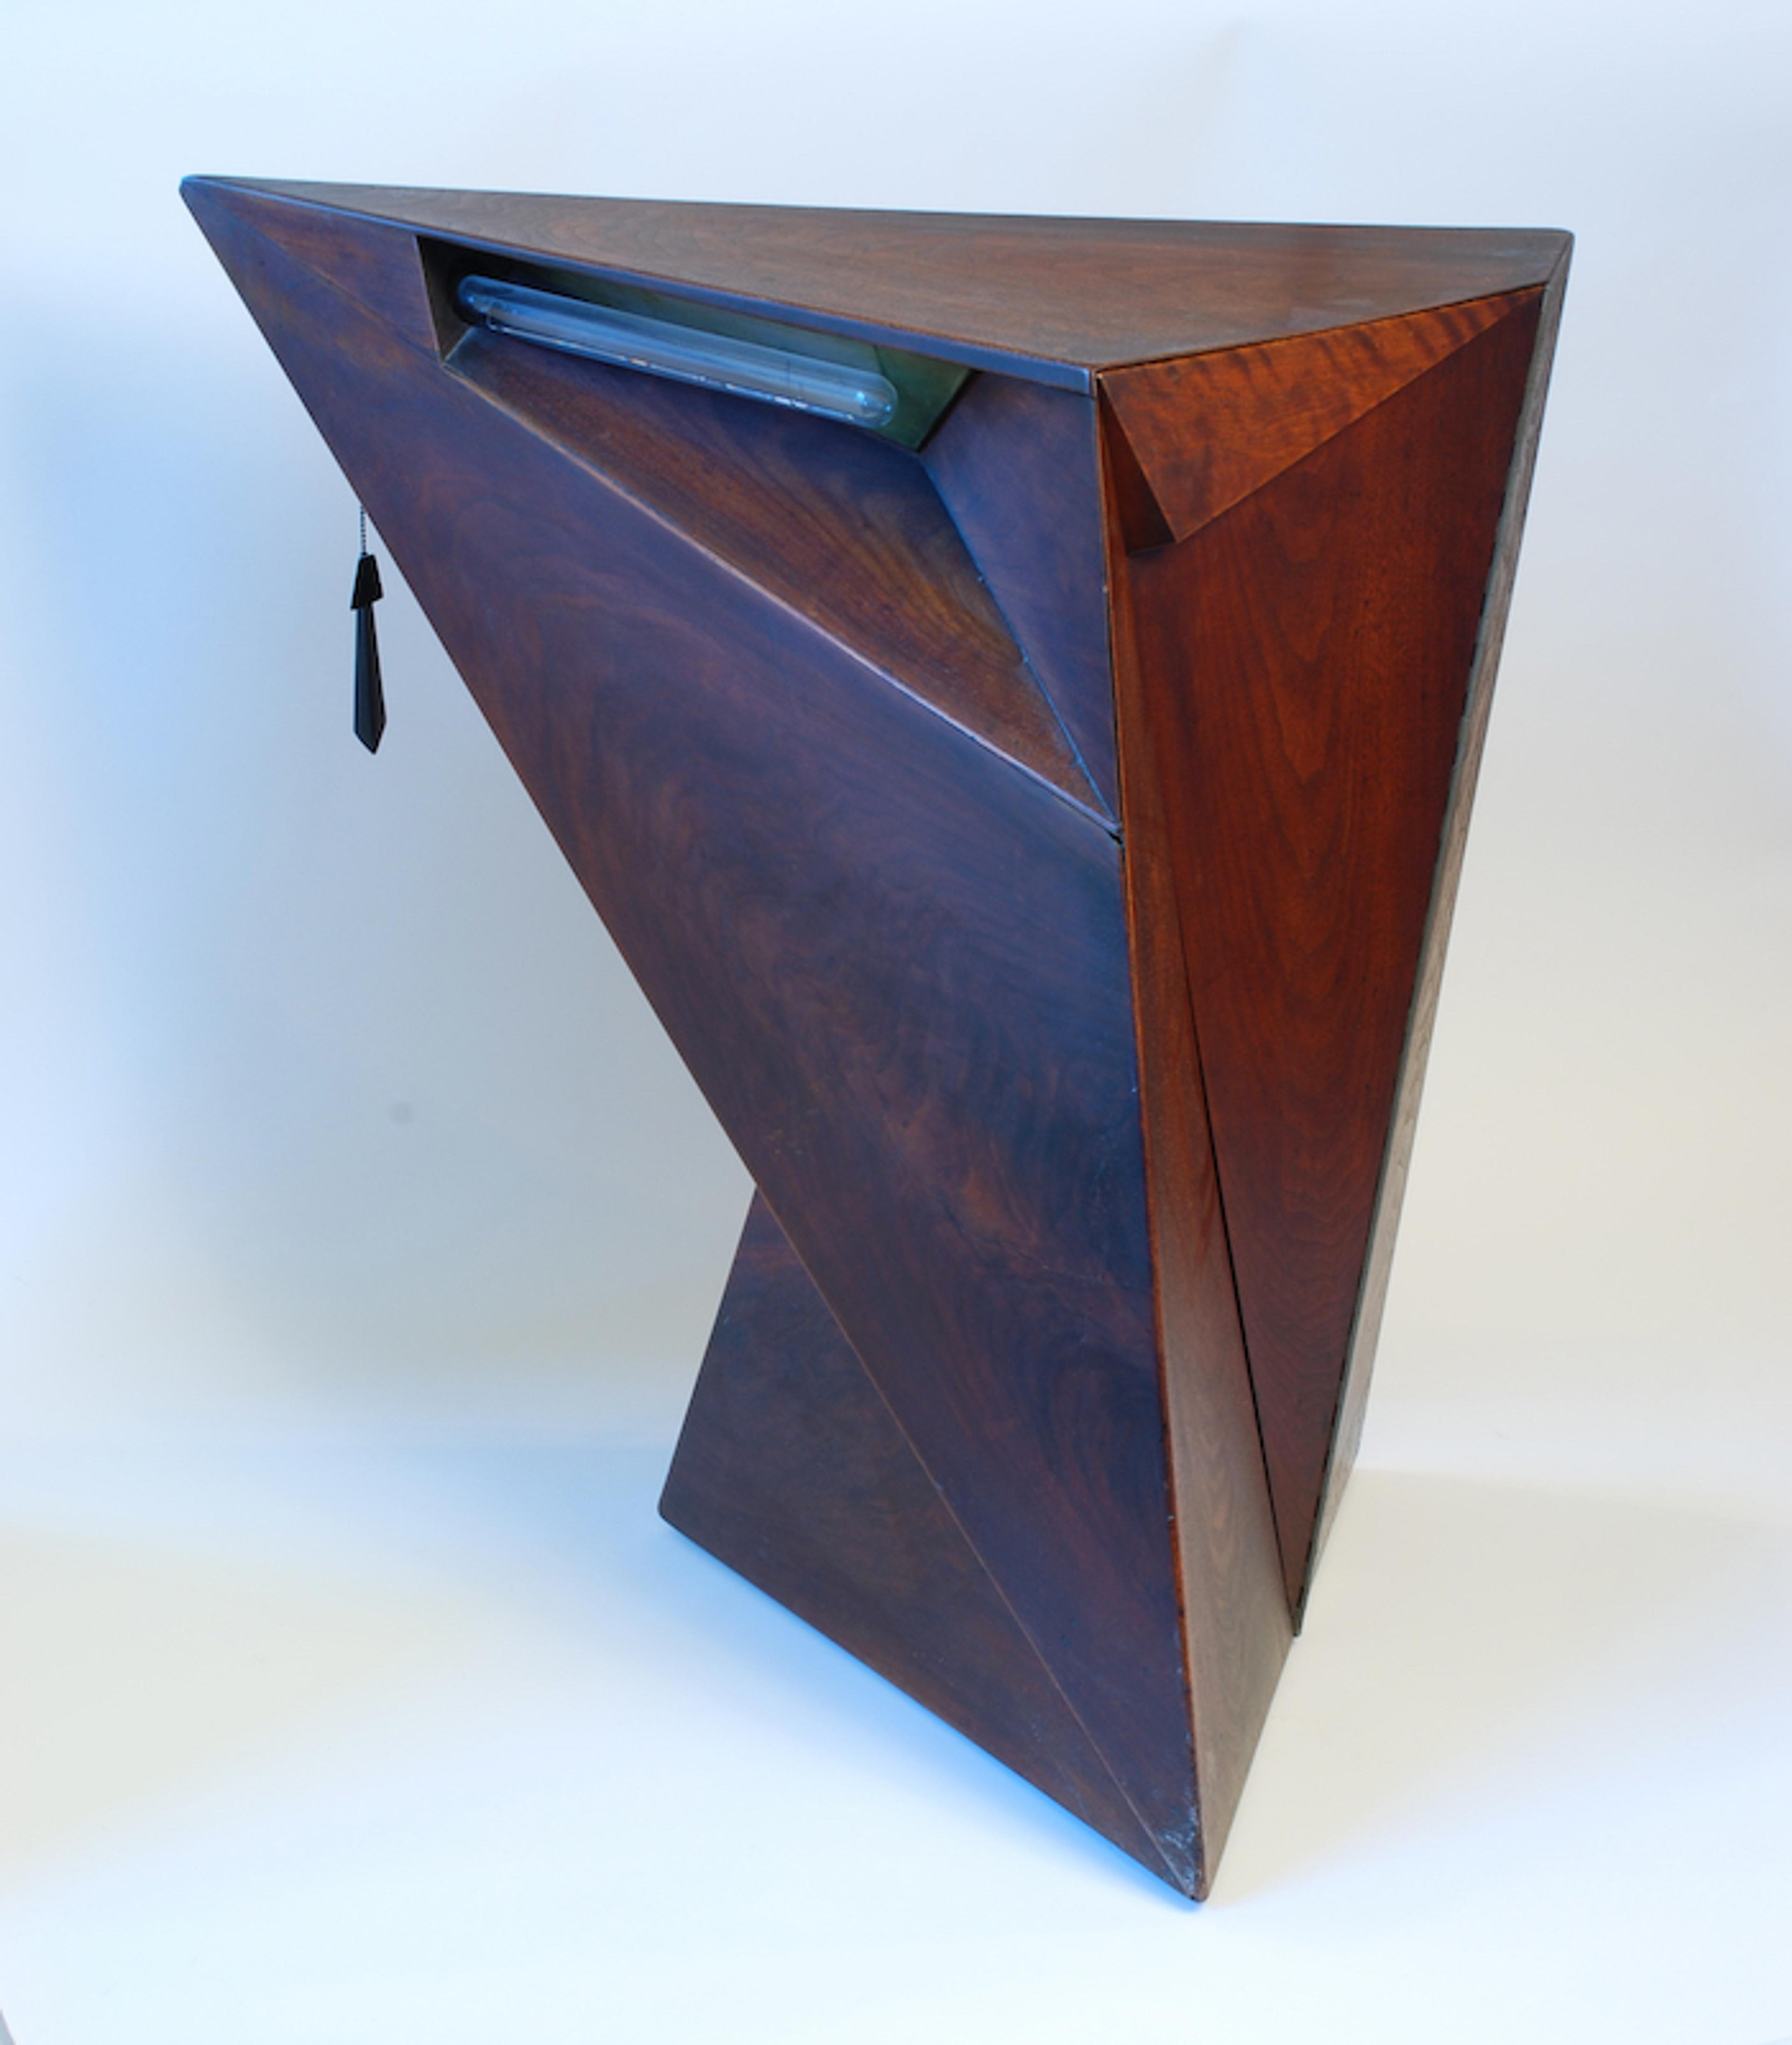 “FISCHER END TABLE WITH LAP LIGHT”: 1932 piece by Wharton Esherick